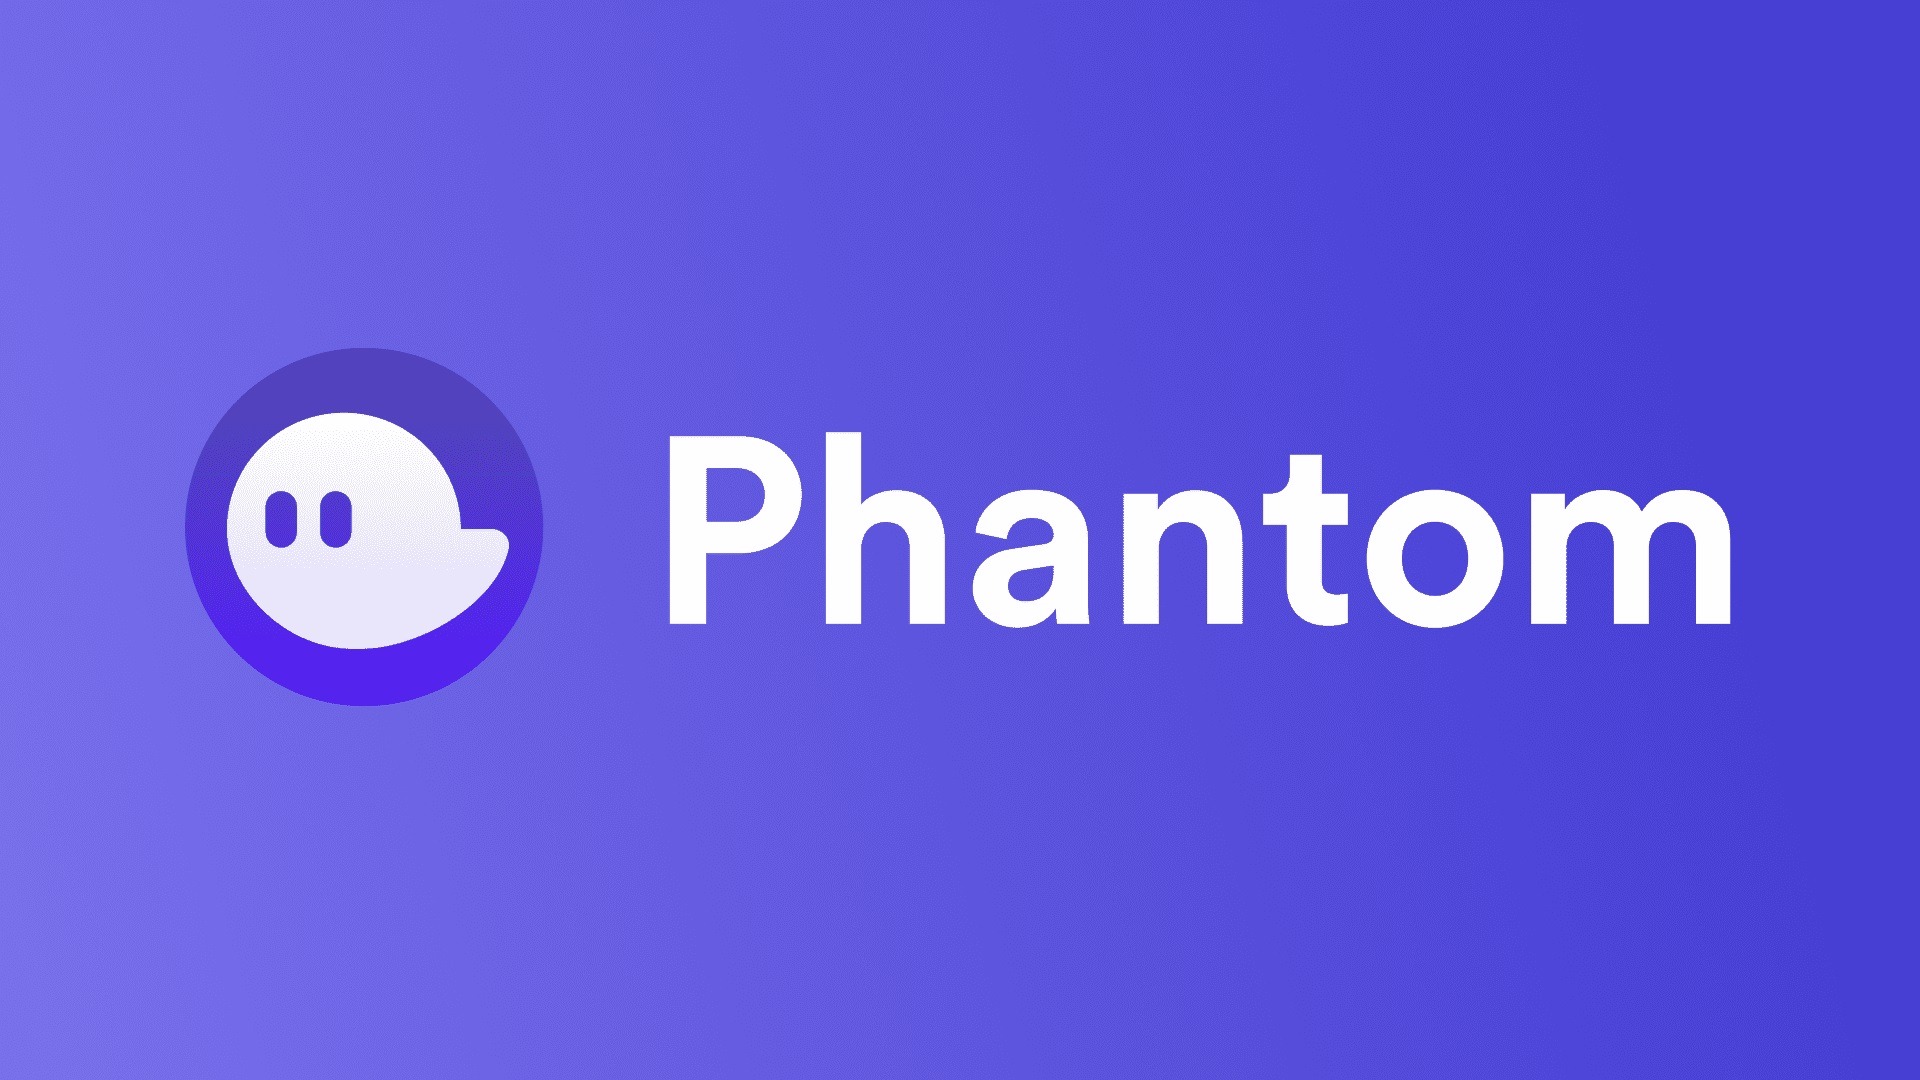 phantom-crypto-wallet-sees-explosive-growth-due-to-solana-based-defi-and-airdrops